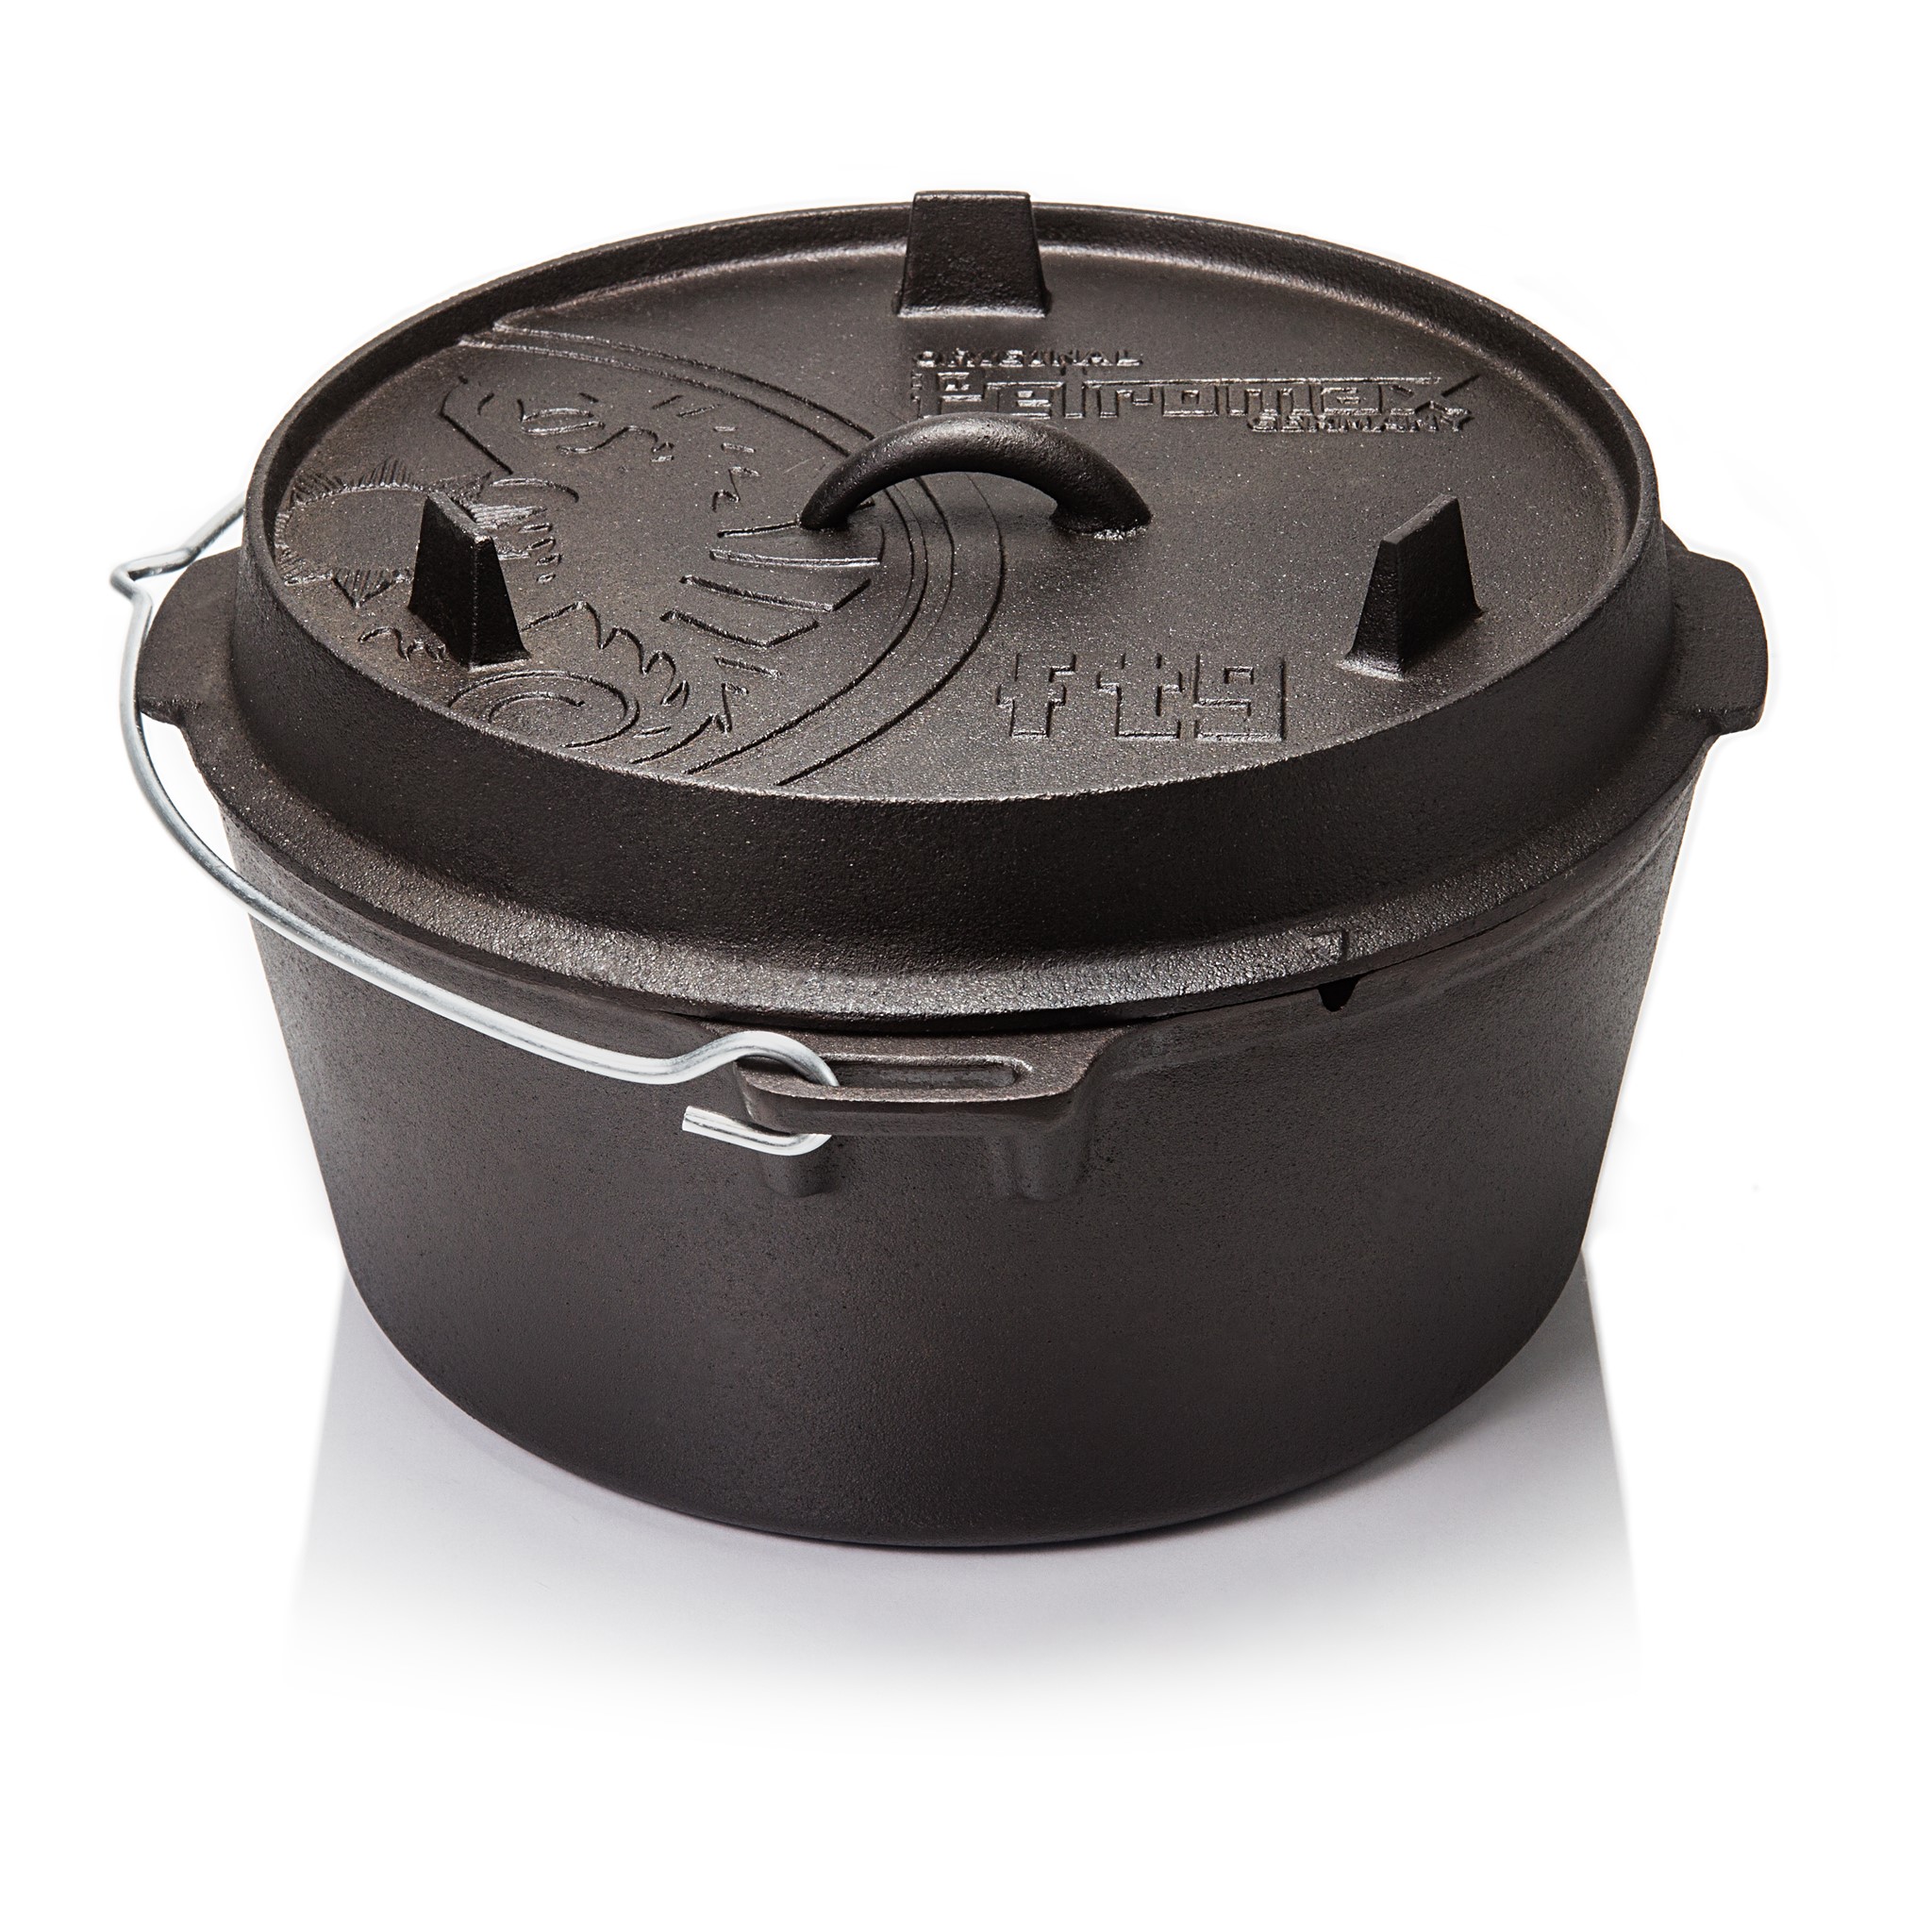 Picture of Petromax - Dutch Oven FT9 Fire Pot 7.5 Liter (without feet)